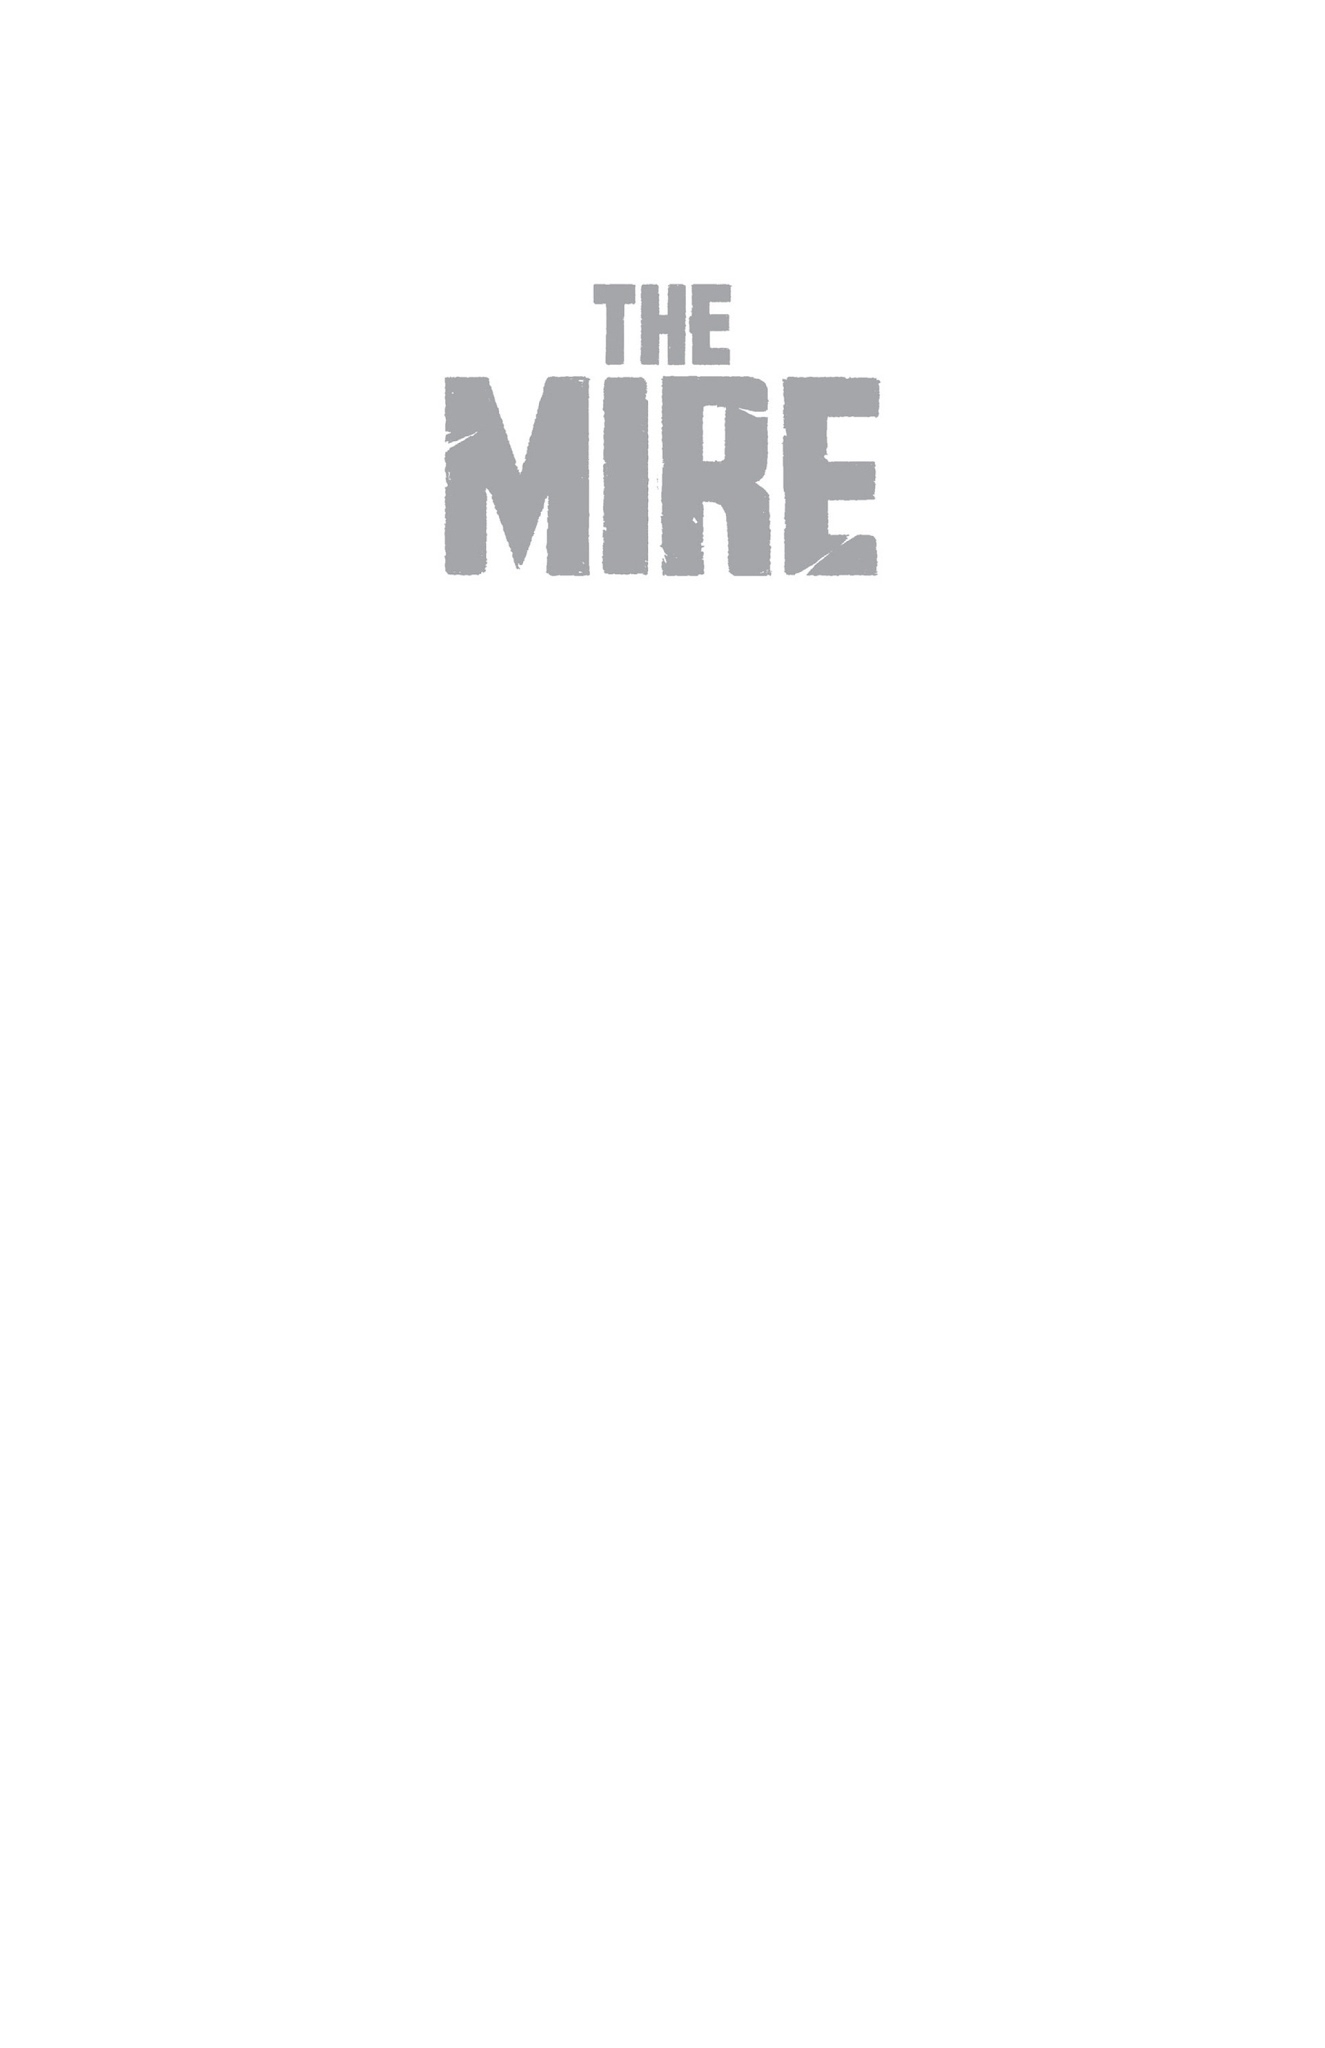 Read online The Mire comic -  Issue # Full - 2